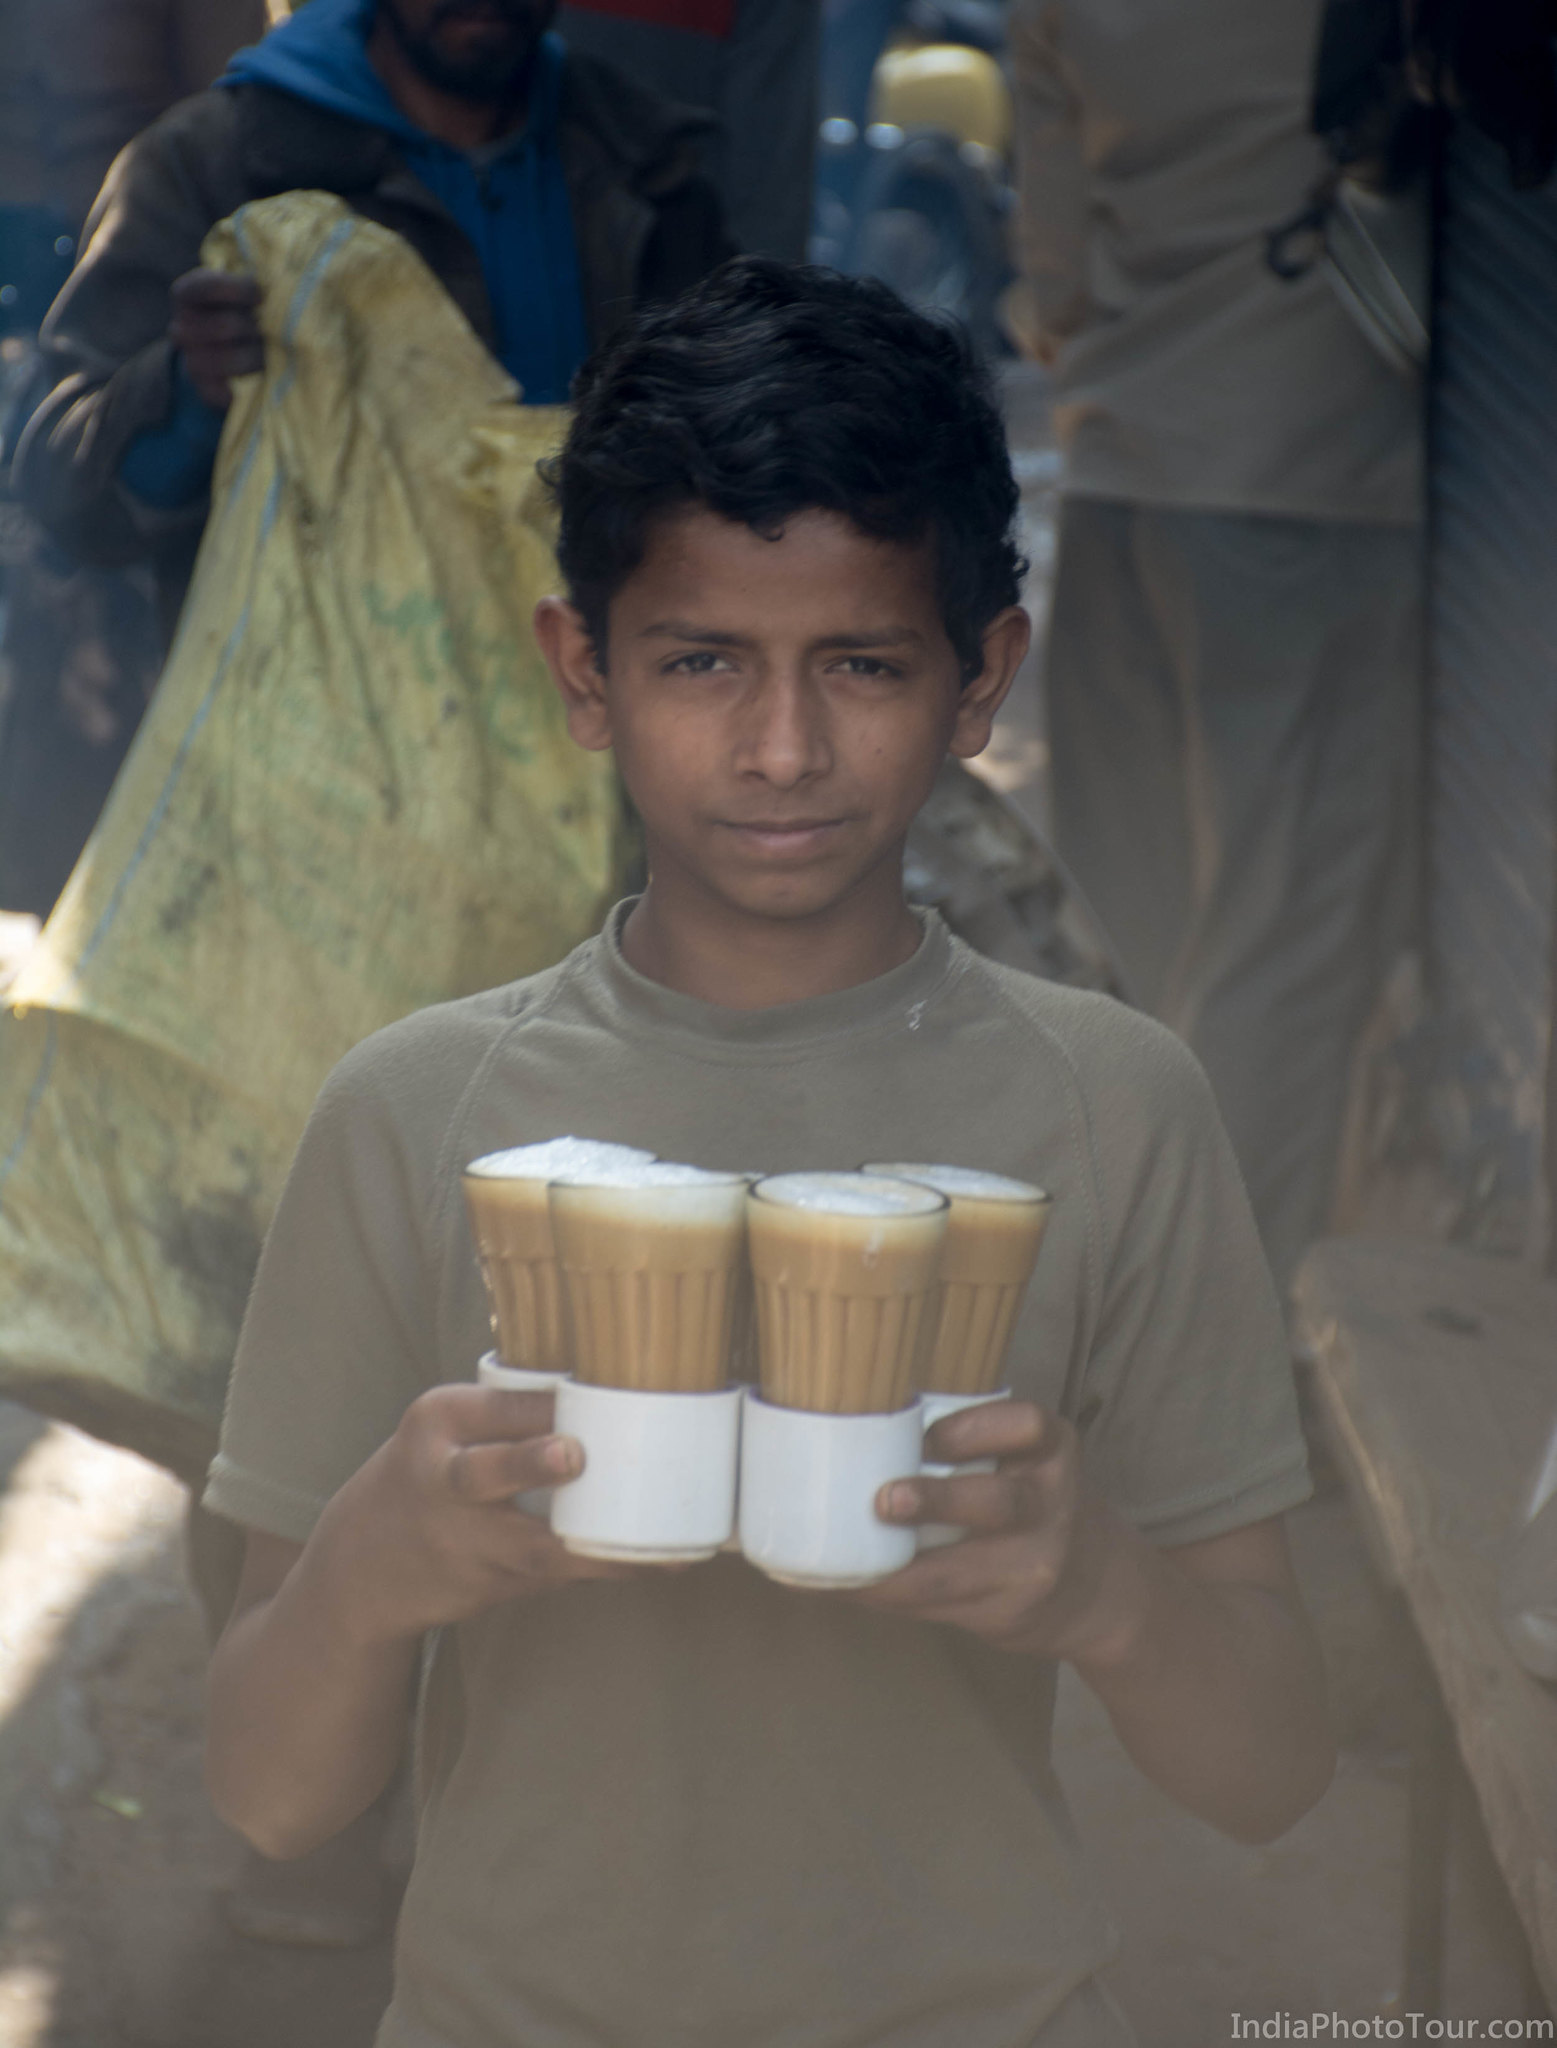 A boy in the street carrying tea